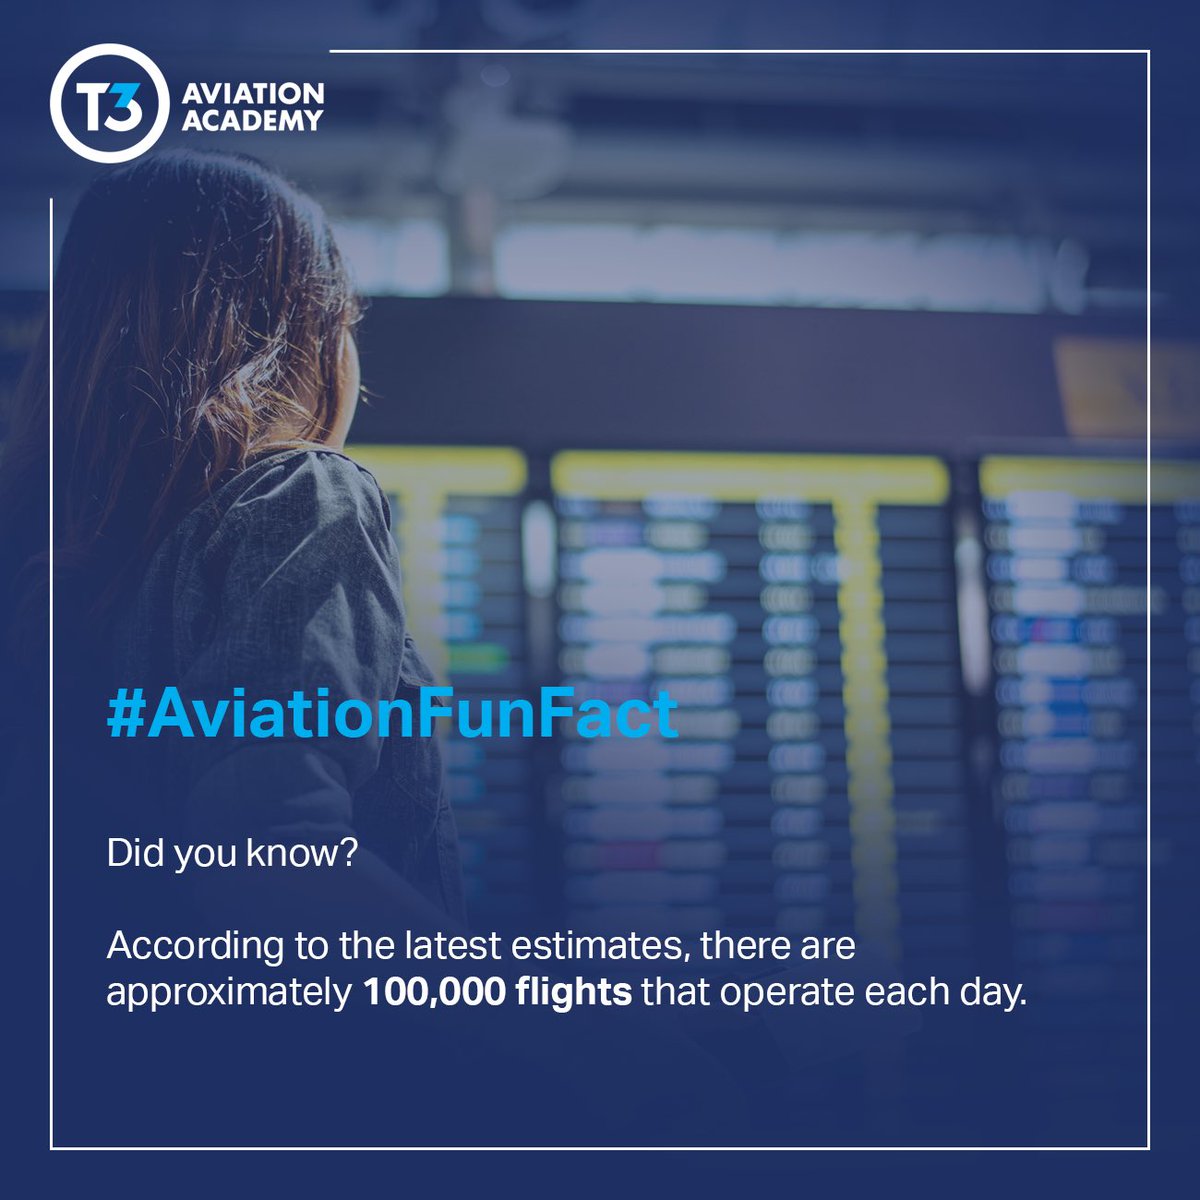 Want to learn more #AviationFacts like this? ​
​
Tune in every Friday! ​
​
#Aviation #AviationLife #facts #fact #knowledgable #factsdaily #didyouknow #dailyfacts #motivation #factsoflife #knowledgeispower #amazingfacts #interestingfacts #education #instafacts #funfacts